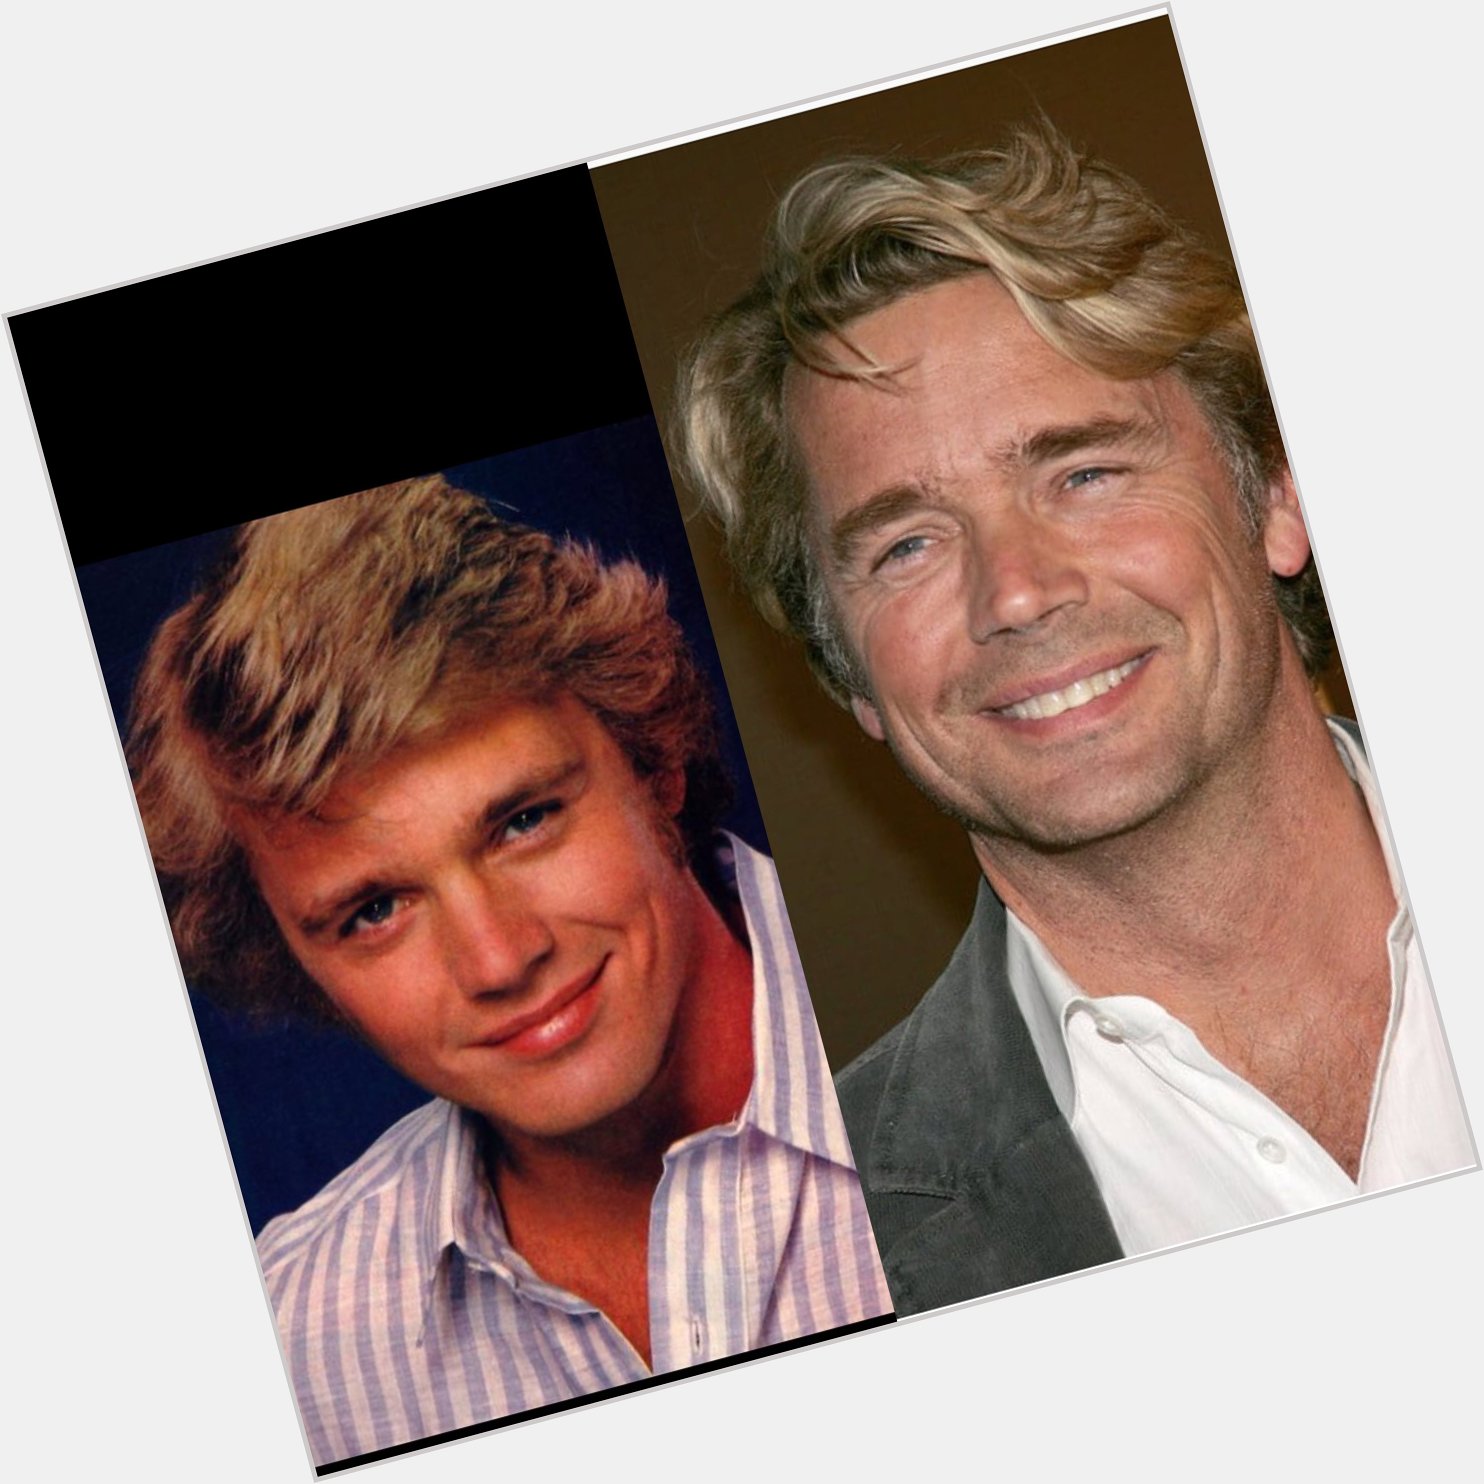 Happy birthday to my favorite Dukes of Hazzard actor John Schneider handsome as ever turns 58 today 